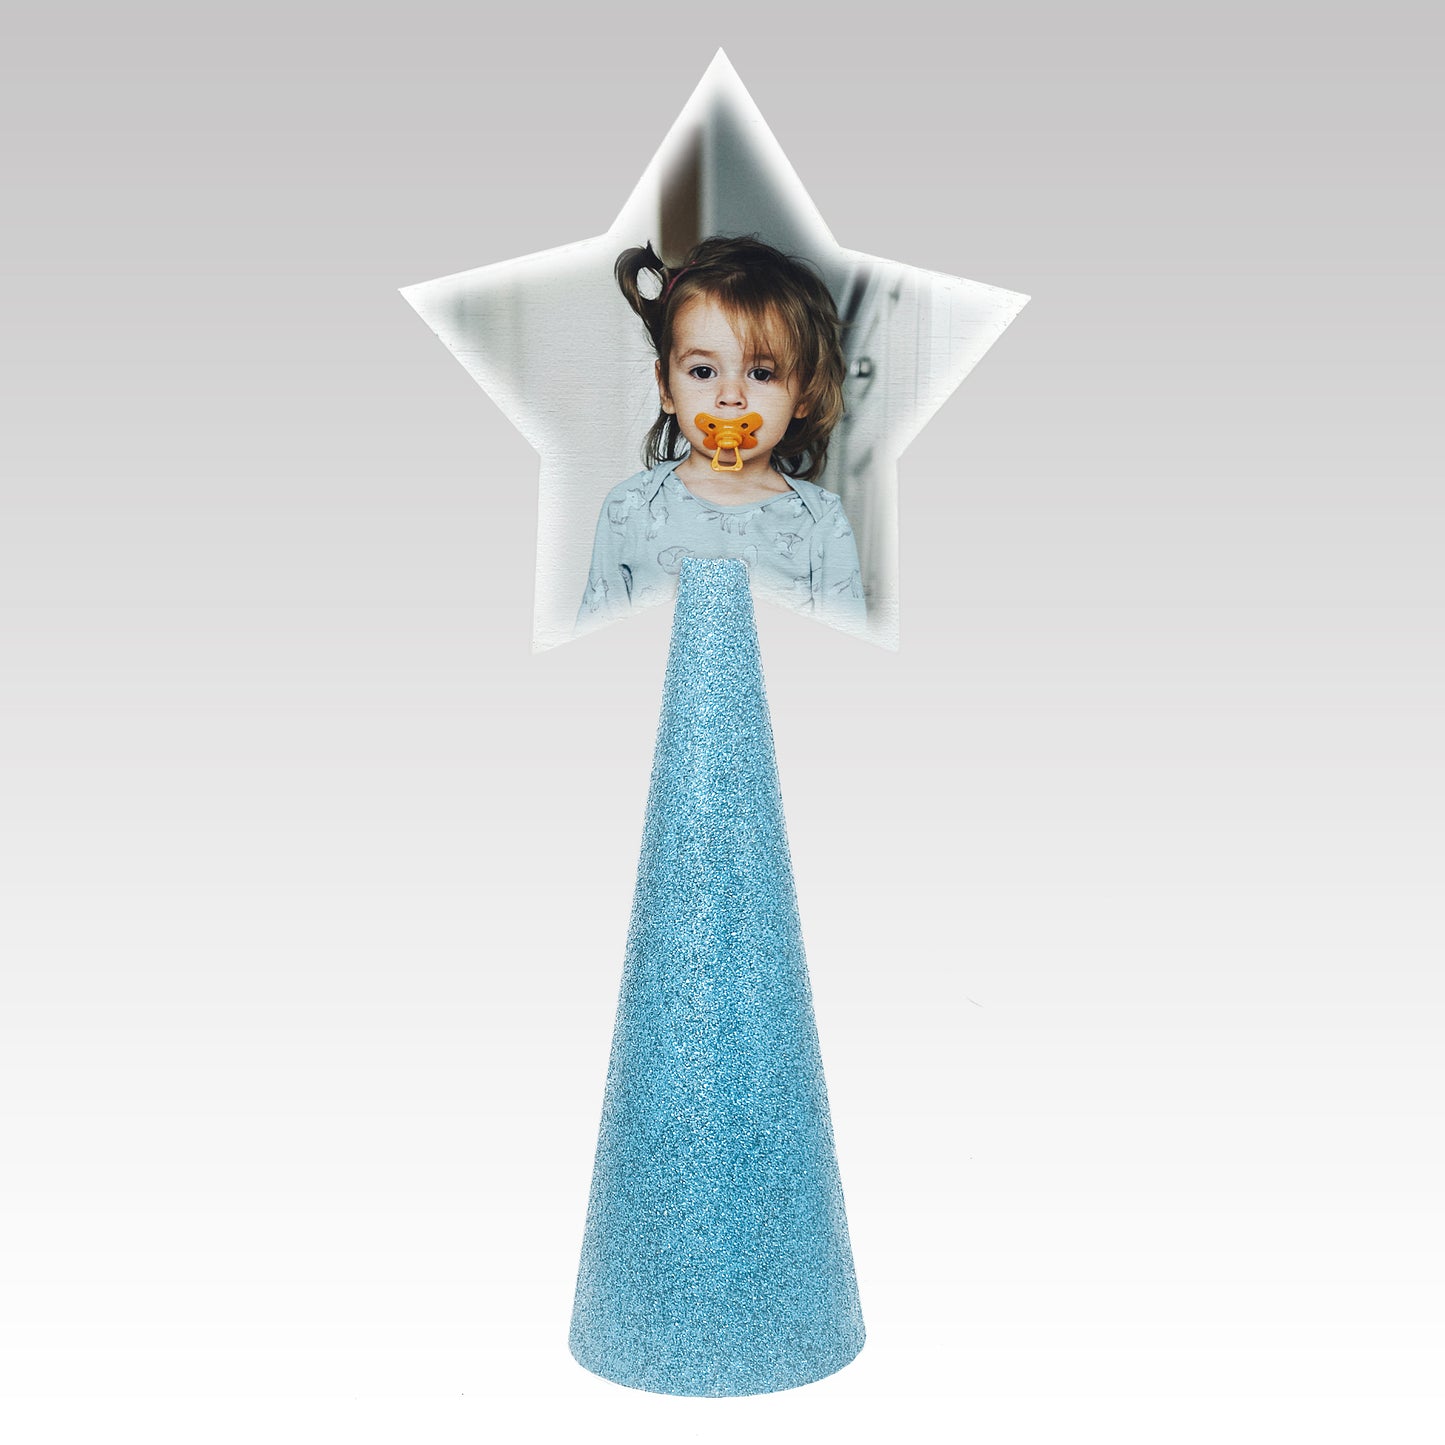 Custom tree topper - White Star with sample toddler photo - ice blue glitter cone